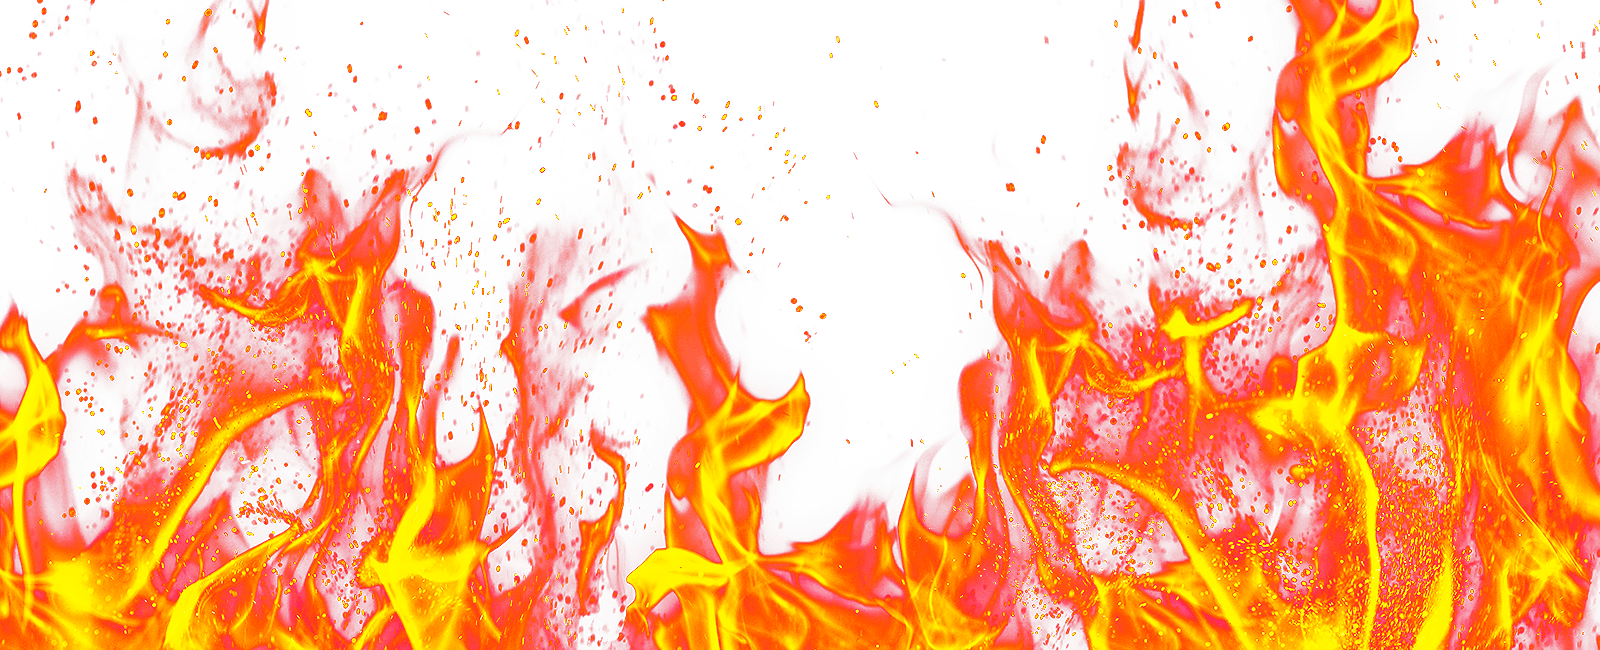 Fire Image PNG Image